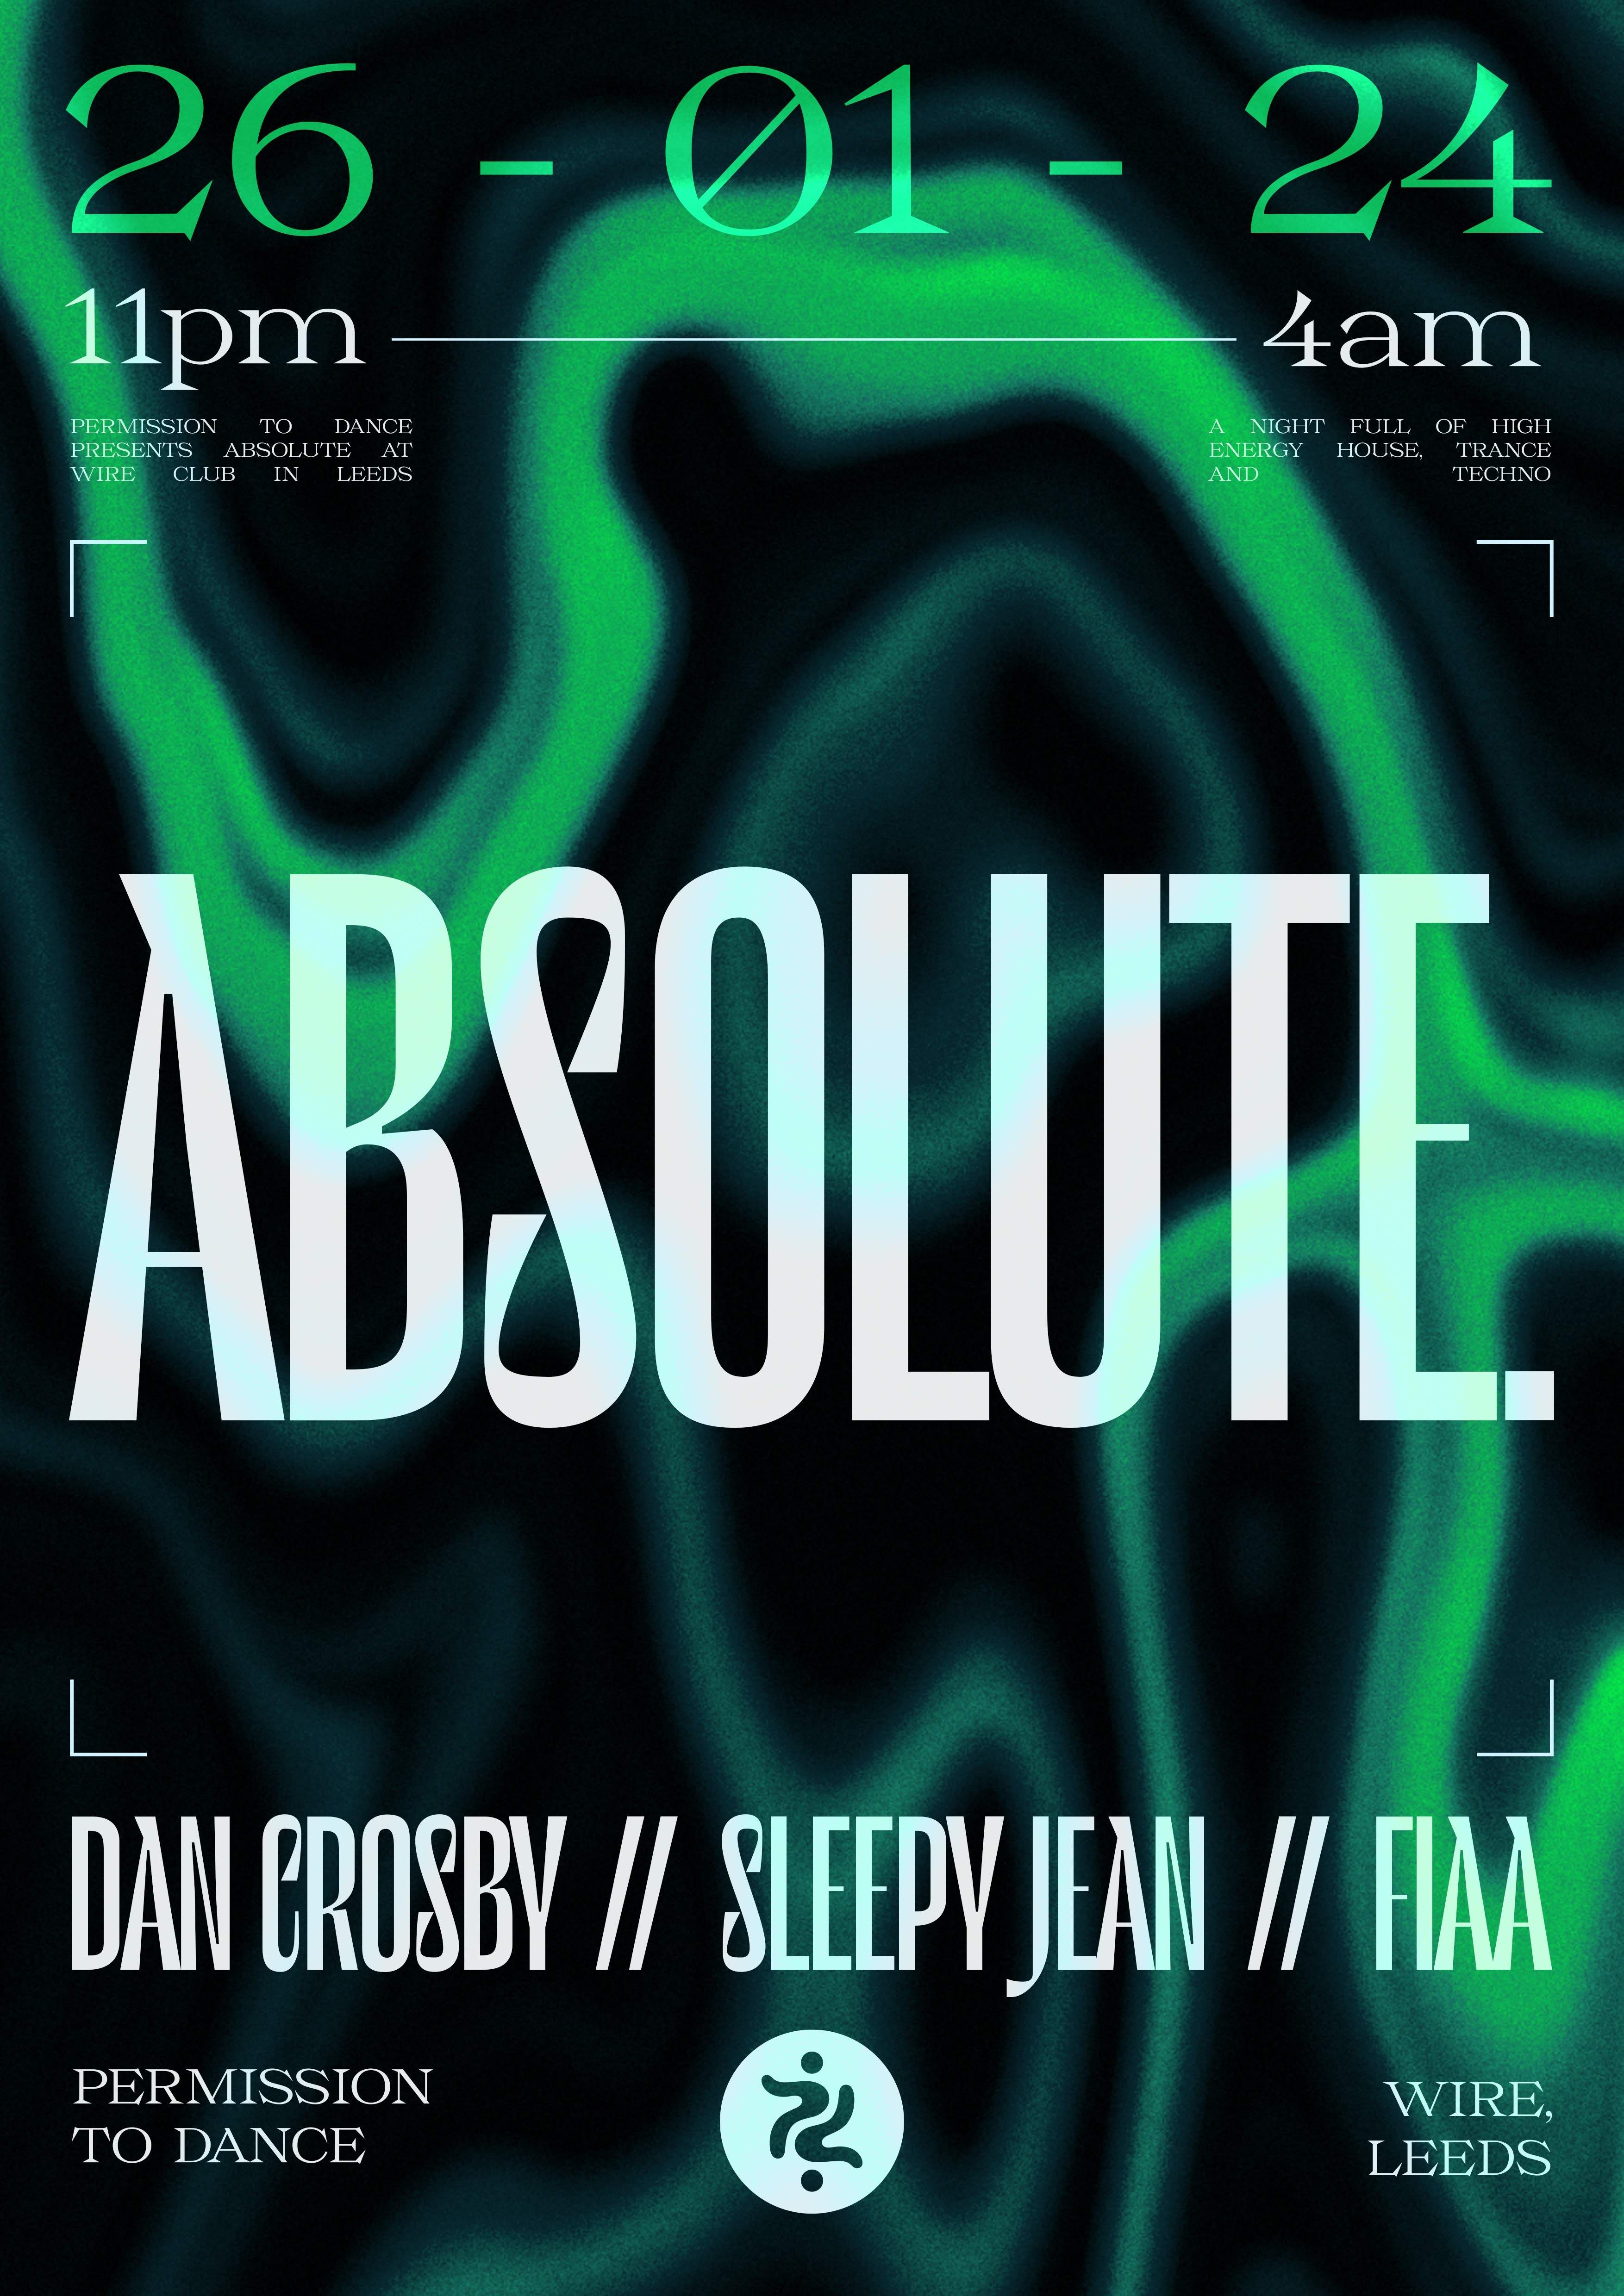 Permission to dance presents: ABSOLUTE - フライヤー表